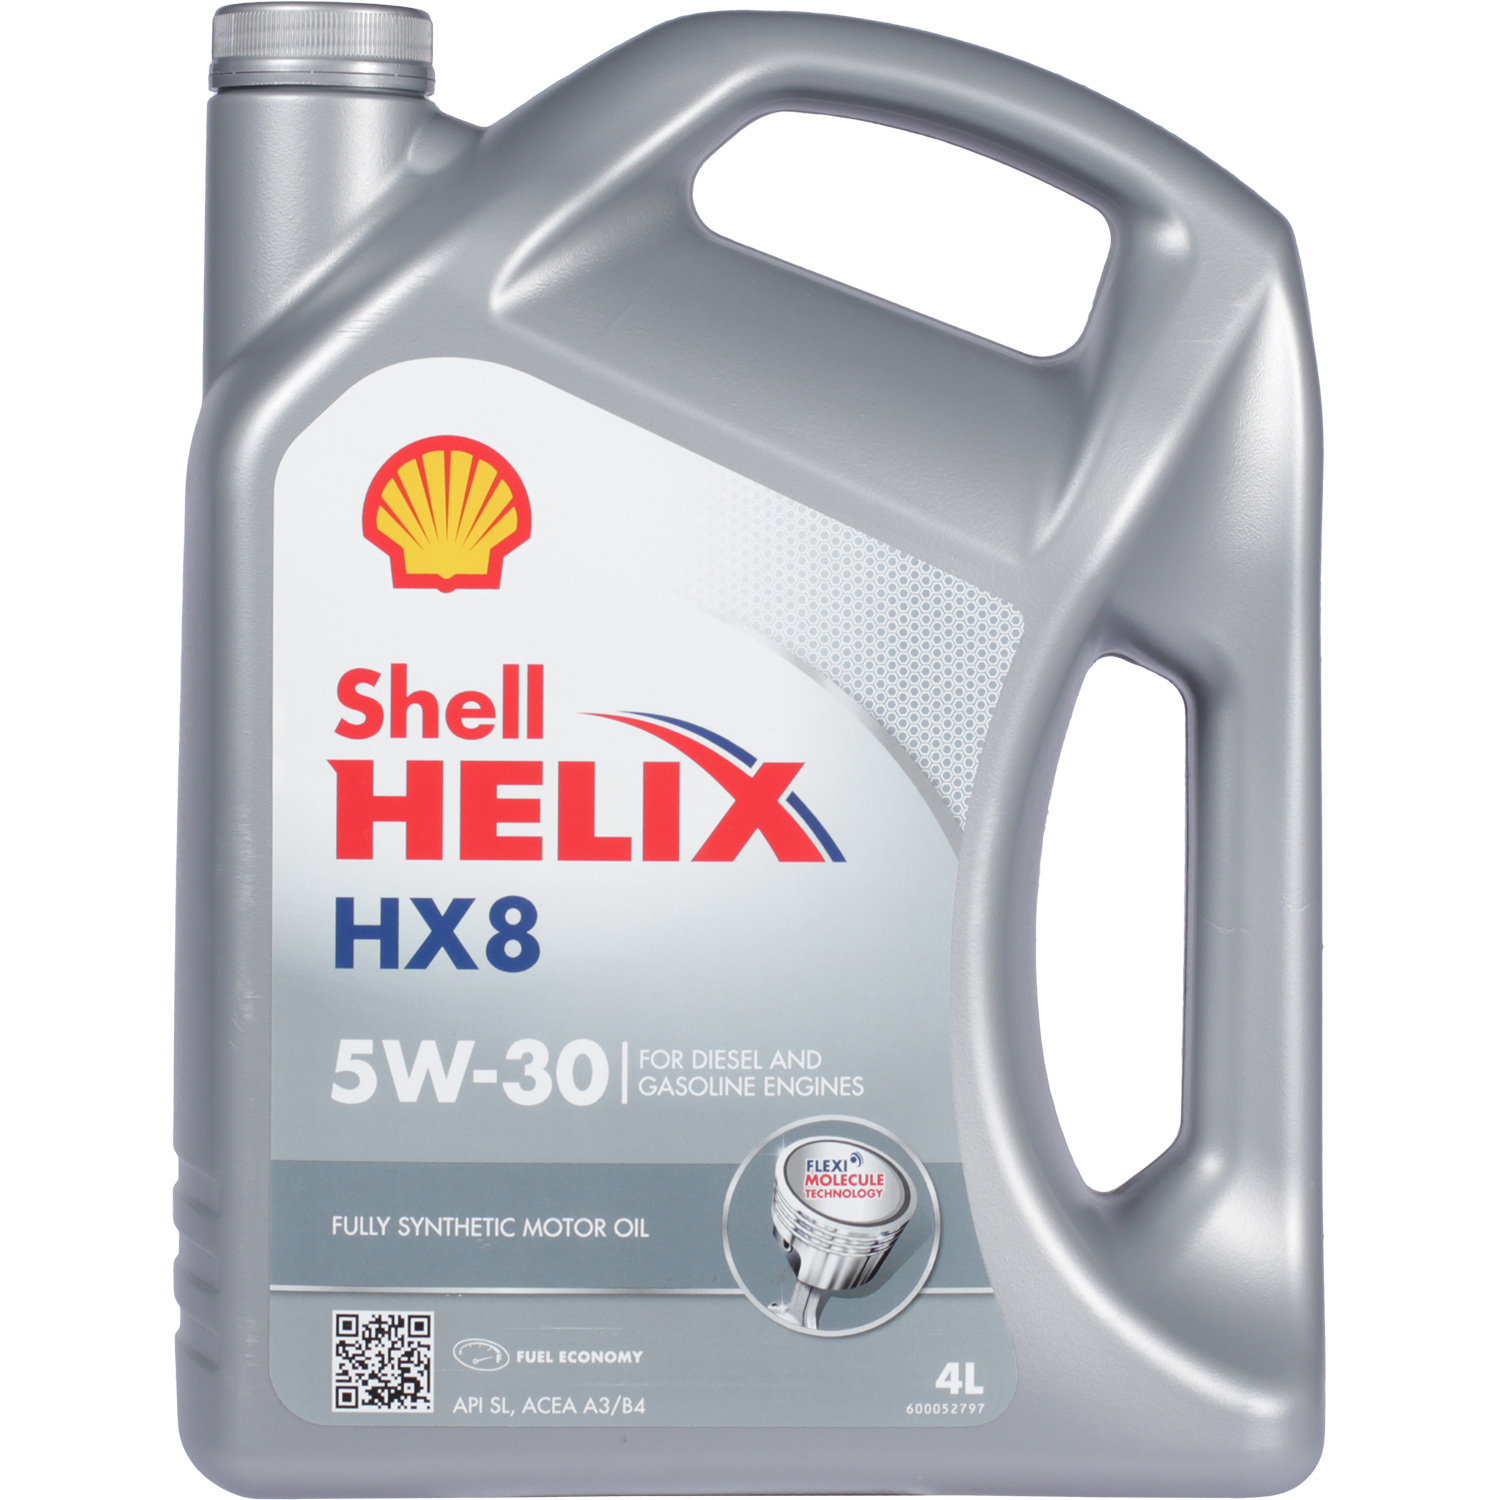 Shell Моторное масло Shell Helix HX8 5W-30, 4 л shell моторное масло shell helix hx8 5w 30 1 л